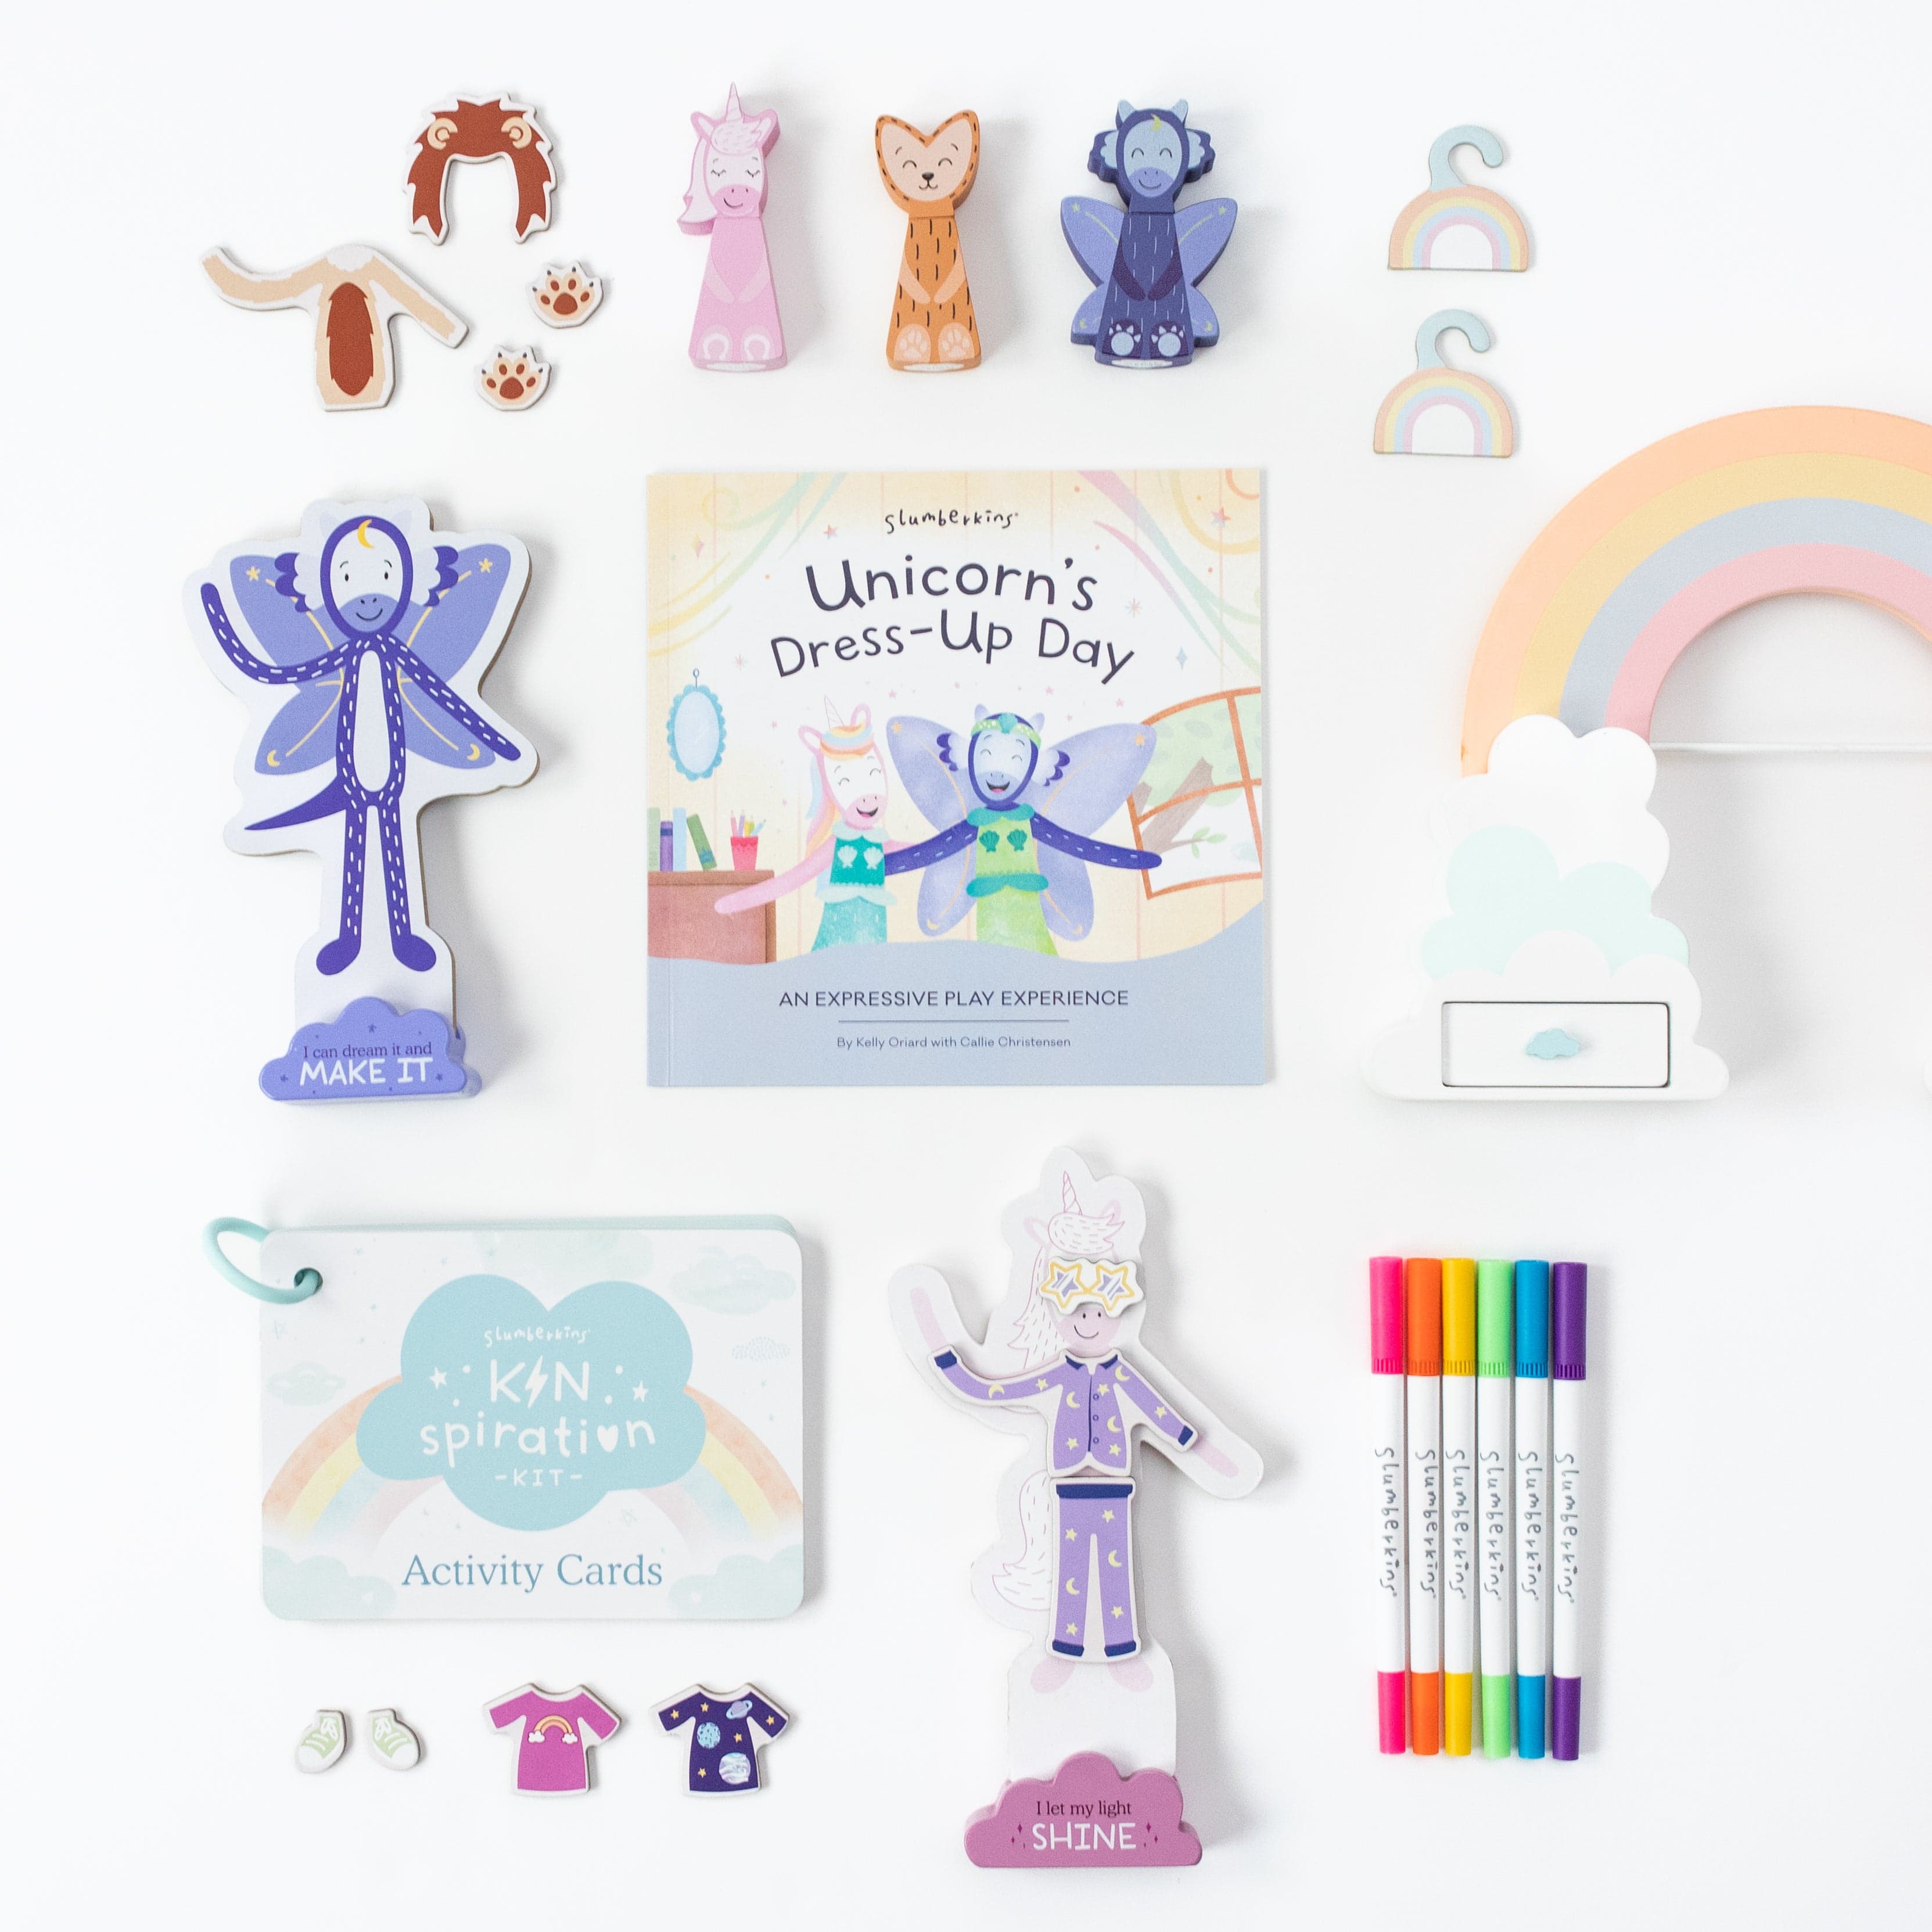 Kinspiration Kit: Expressive Play with Unicorn and Dragon - View Product